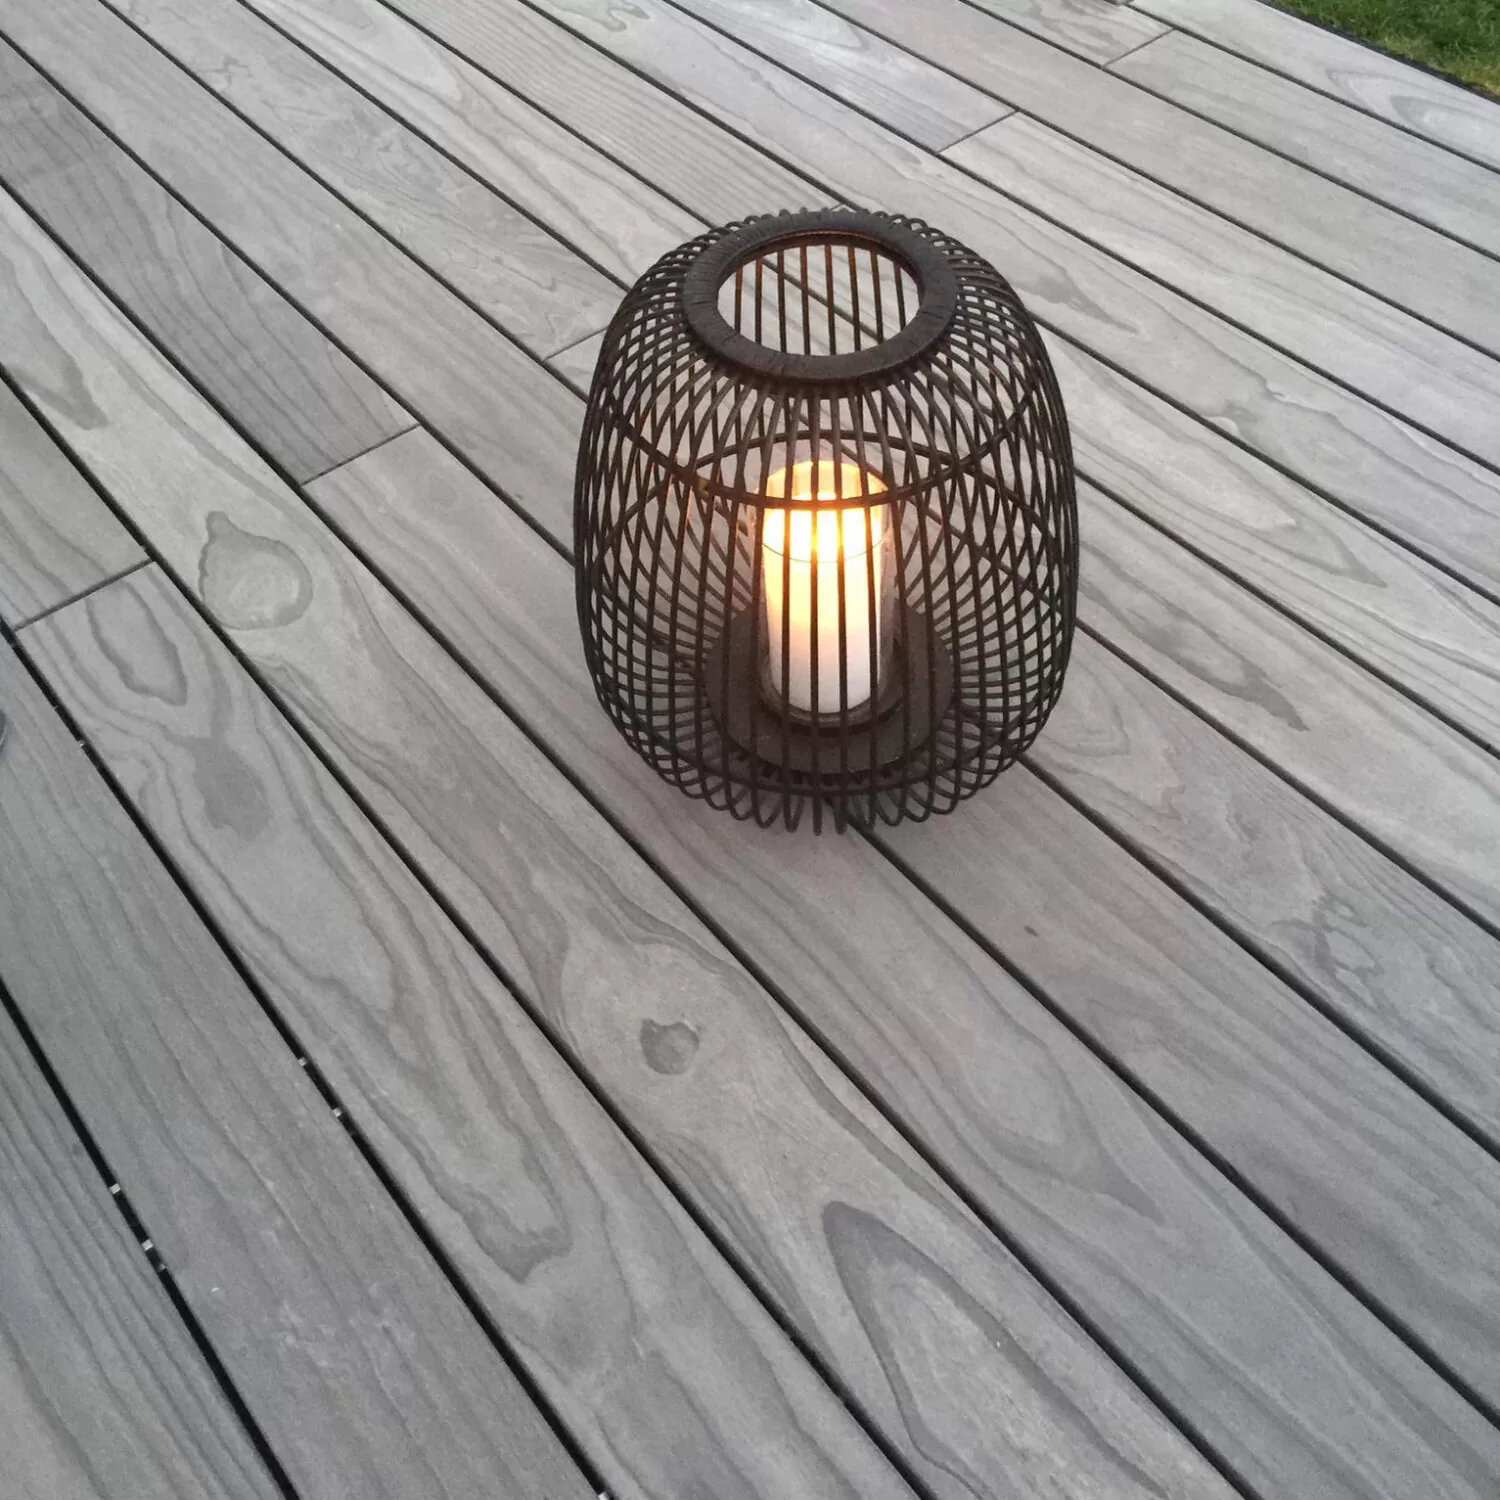 Accoya-Color-Gray-Decking-with-candle-lantern-square-1500x1500-copy